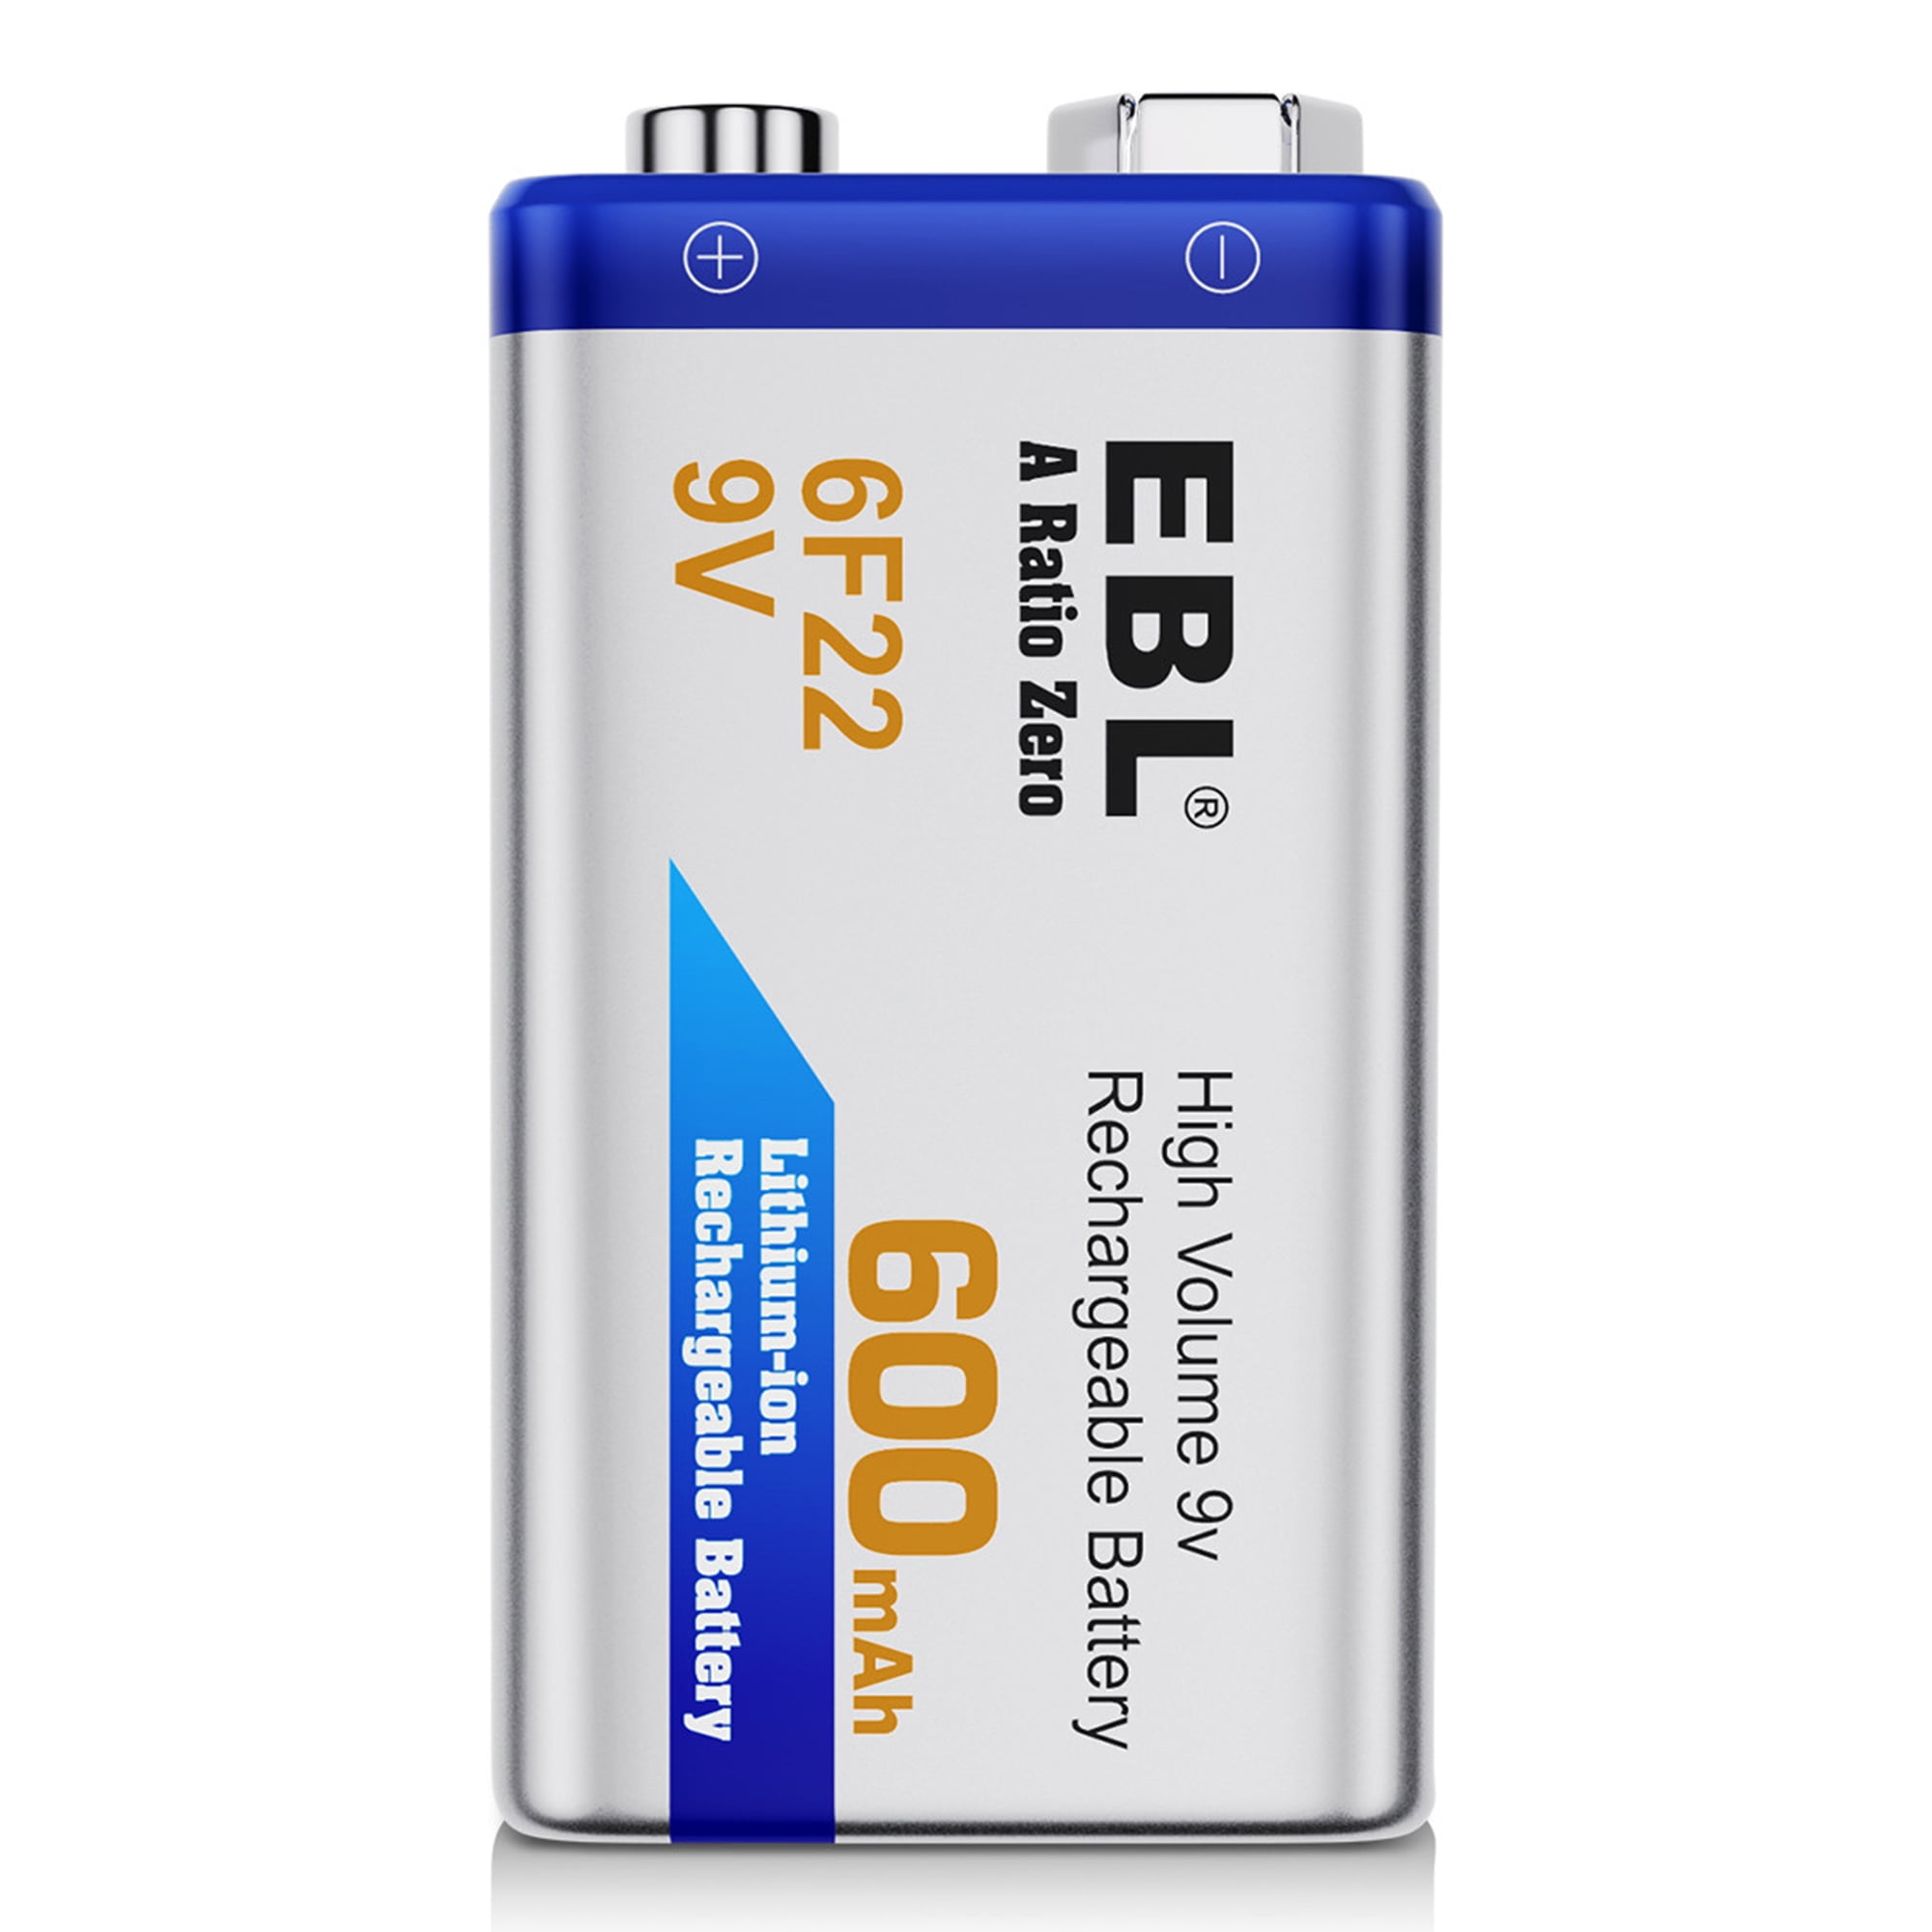 EBL 12 Pack 6F22 600mAh 9V Lithium-ion Rechargeable Batteries with 4 Bay 9V  Li-ion Battery Charger 